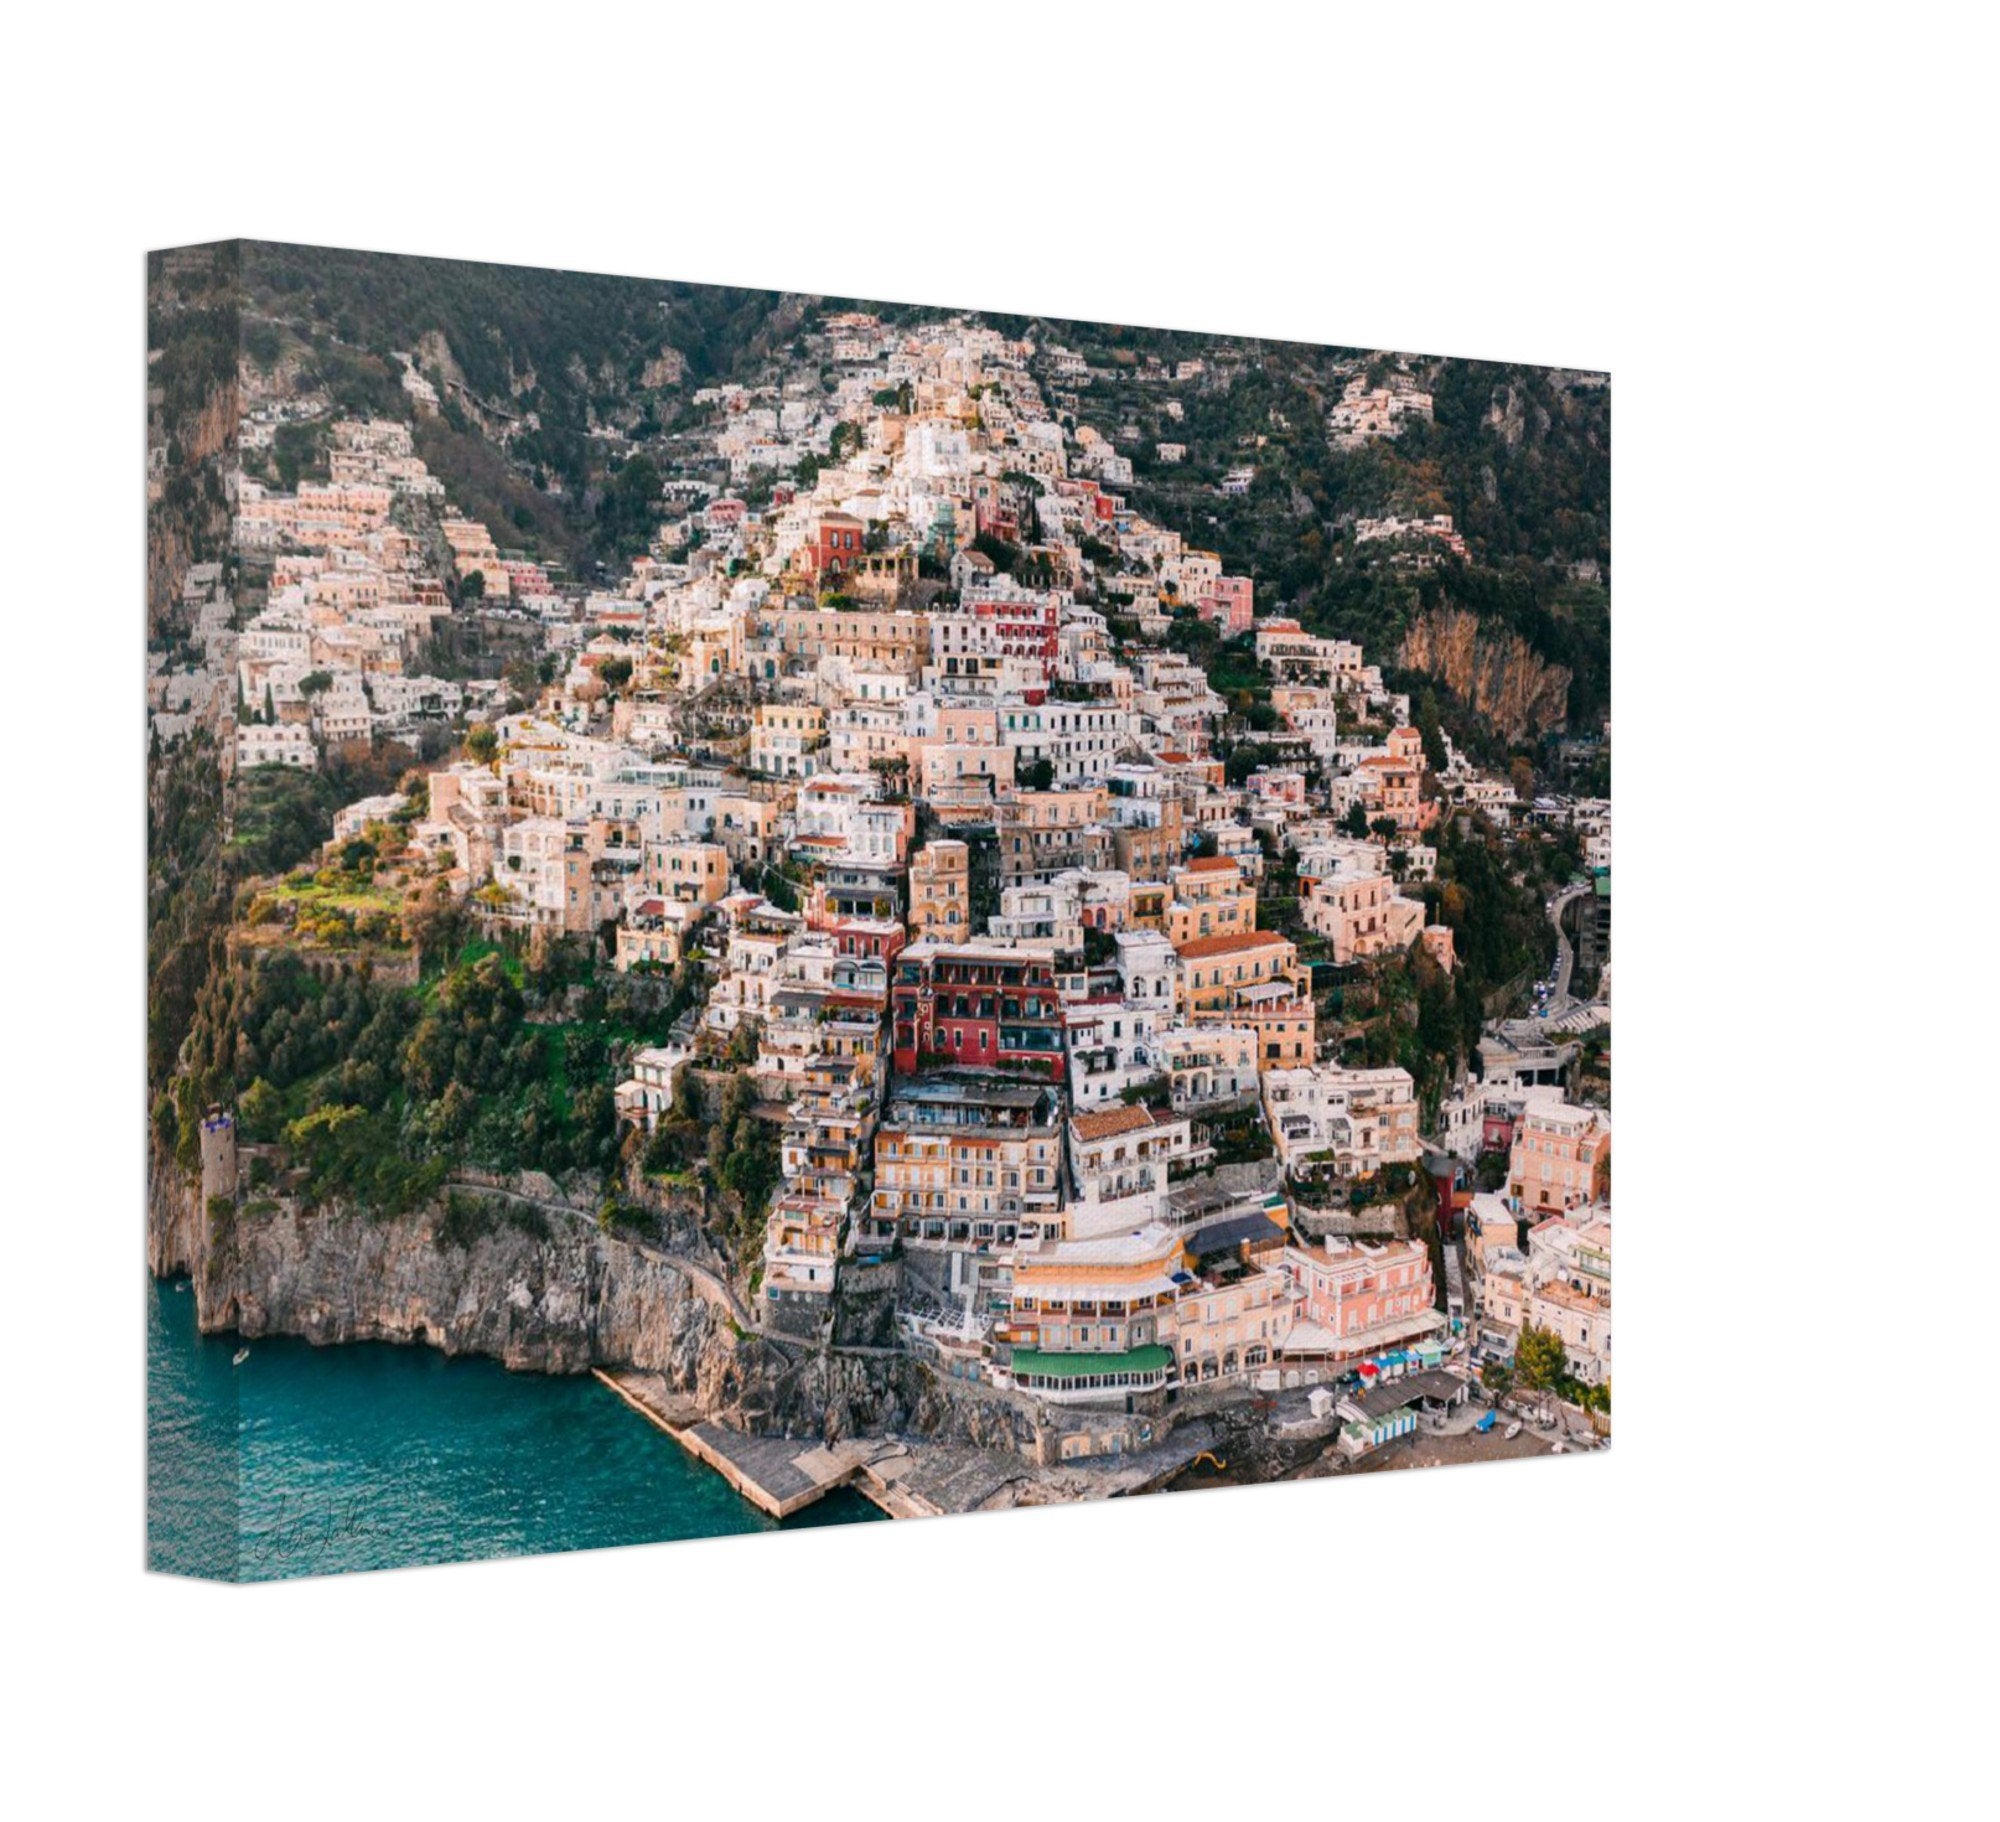 "The Cliff" Aerial View Positano Wall Art Canvas